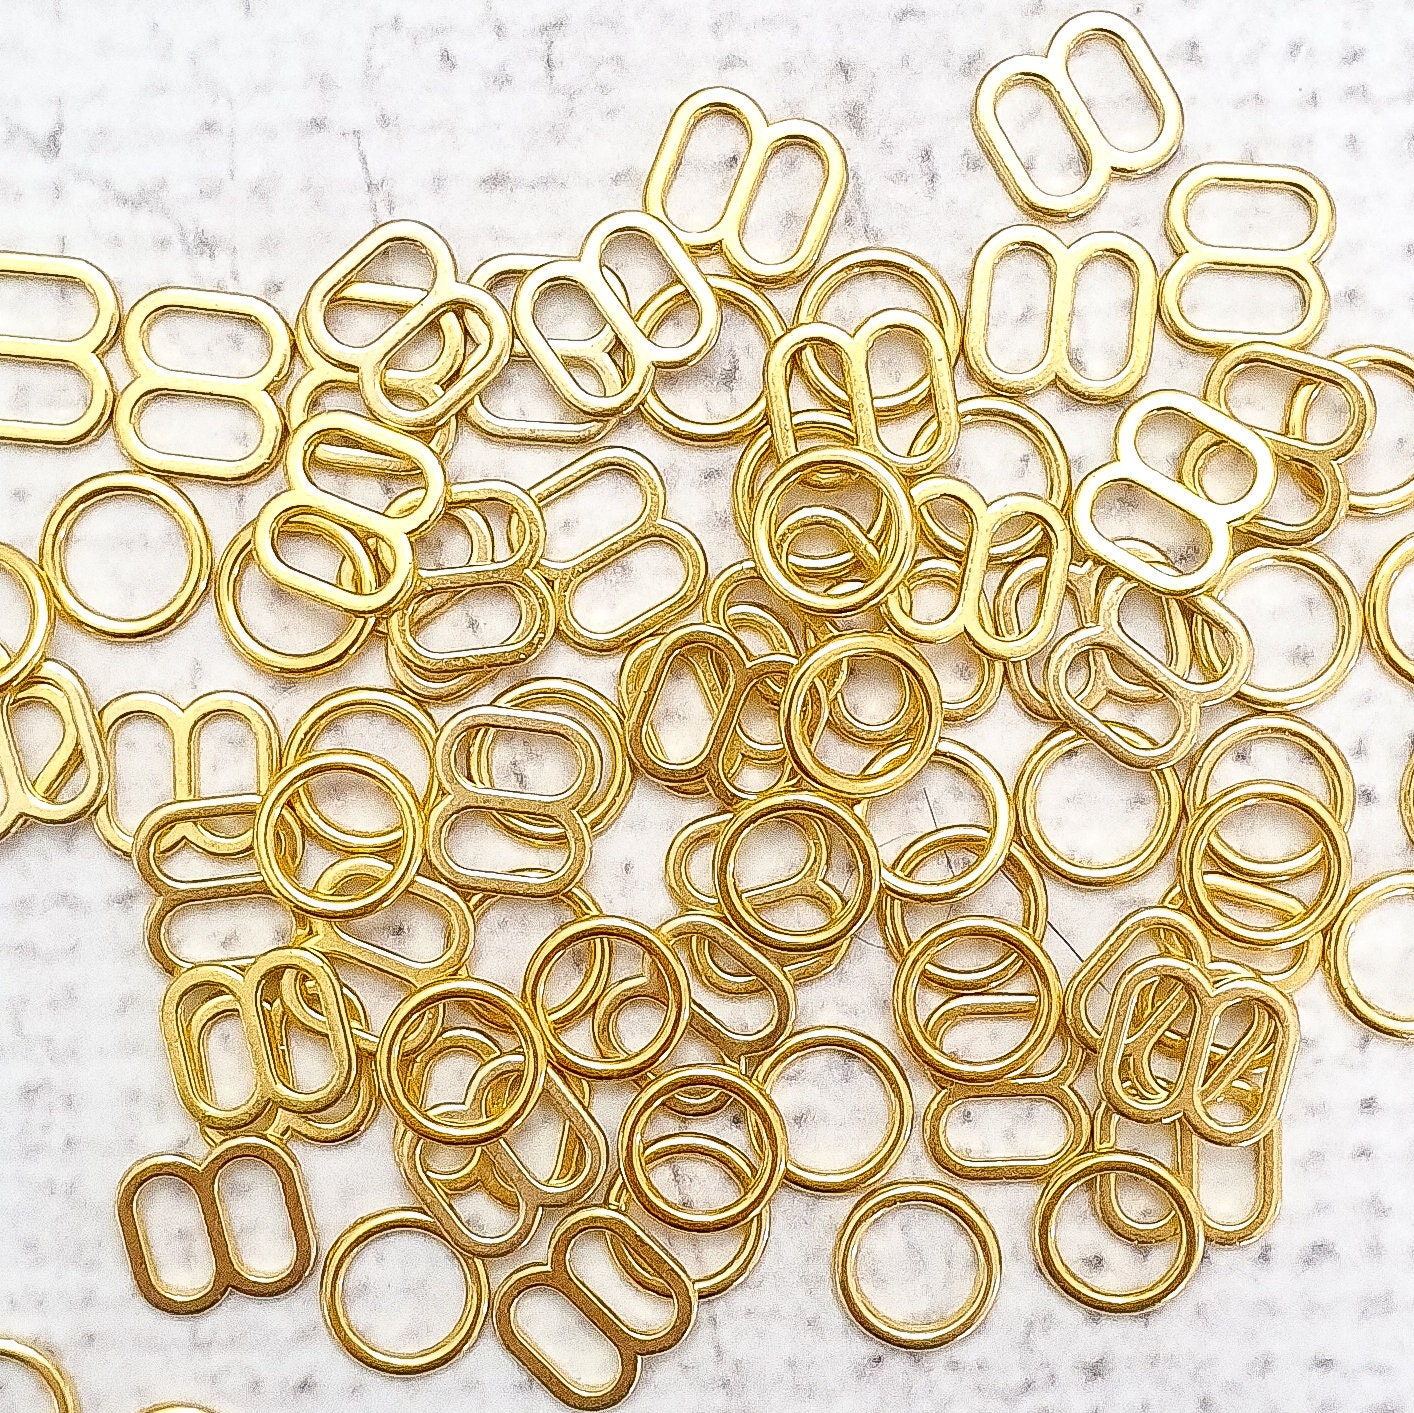 6mm GOLD Colour Bra Rings and Sliders 1/4 Inch Metal Alloy - Etsy